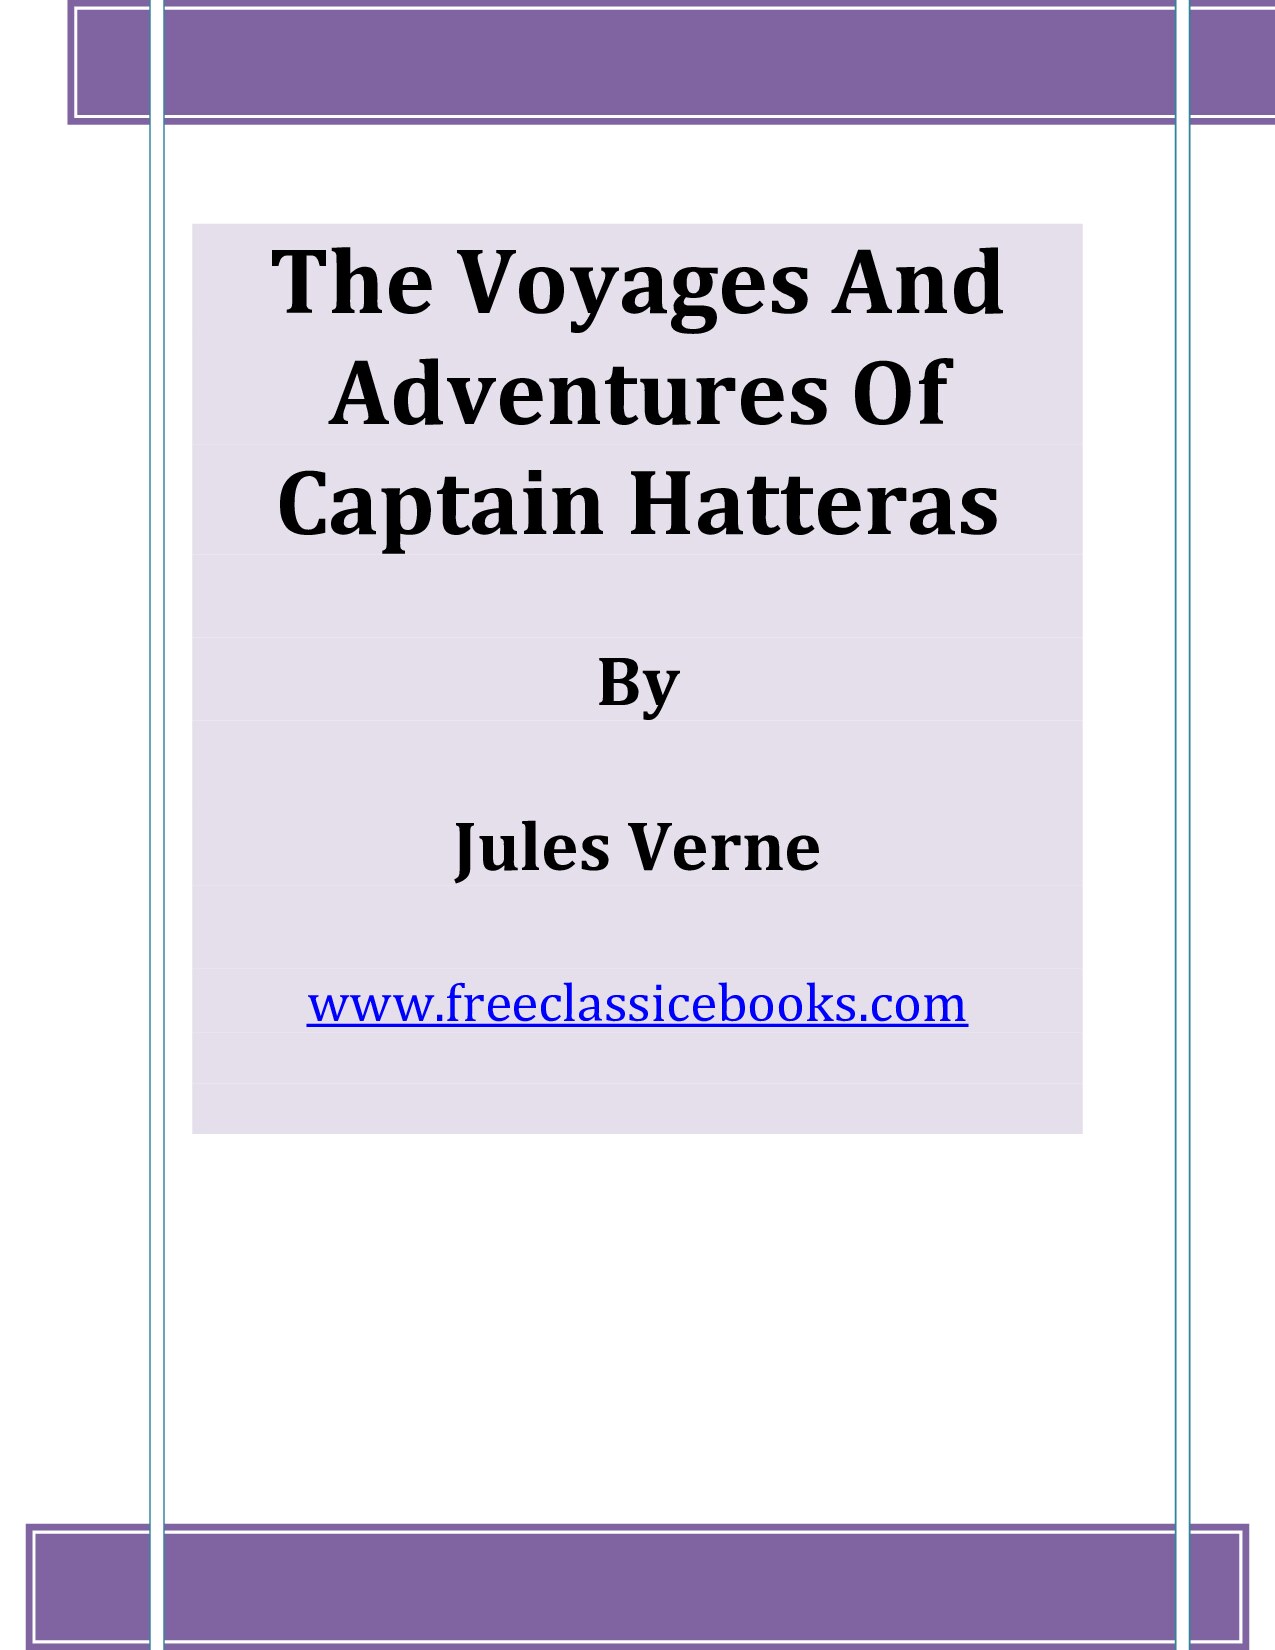 Microsoft Word - The Voyages And Adventures Of Captain Hatteras.doc